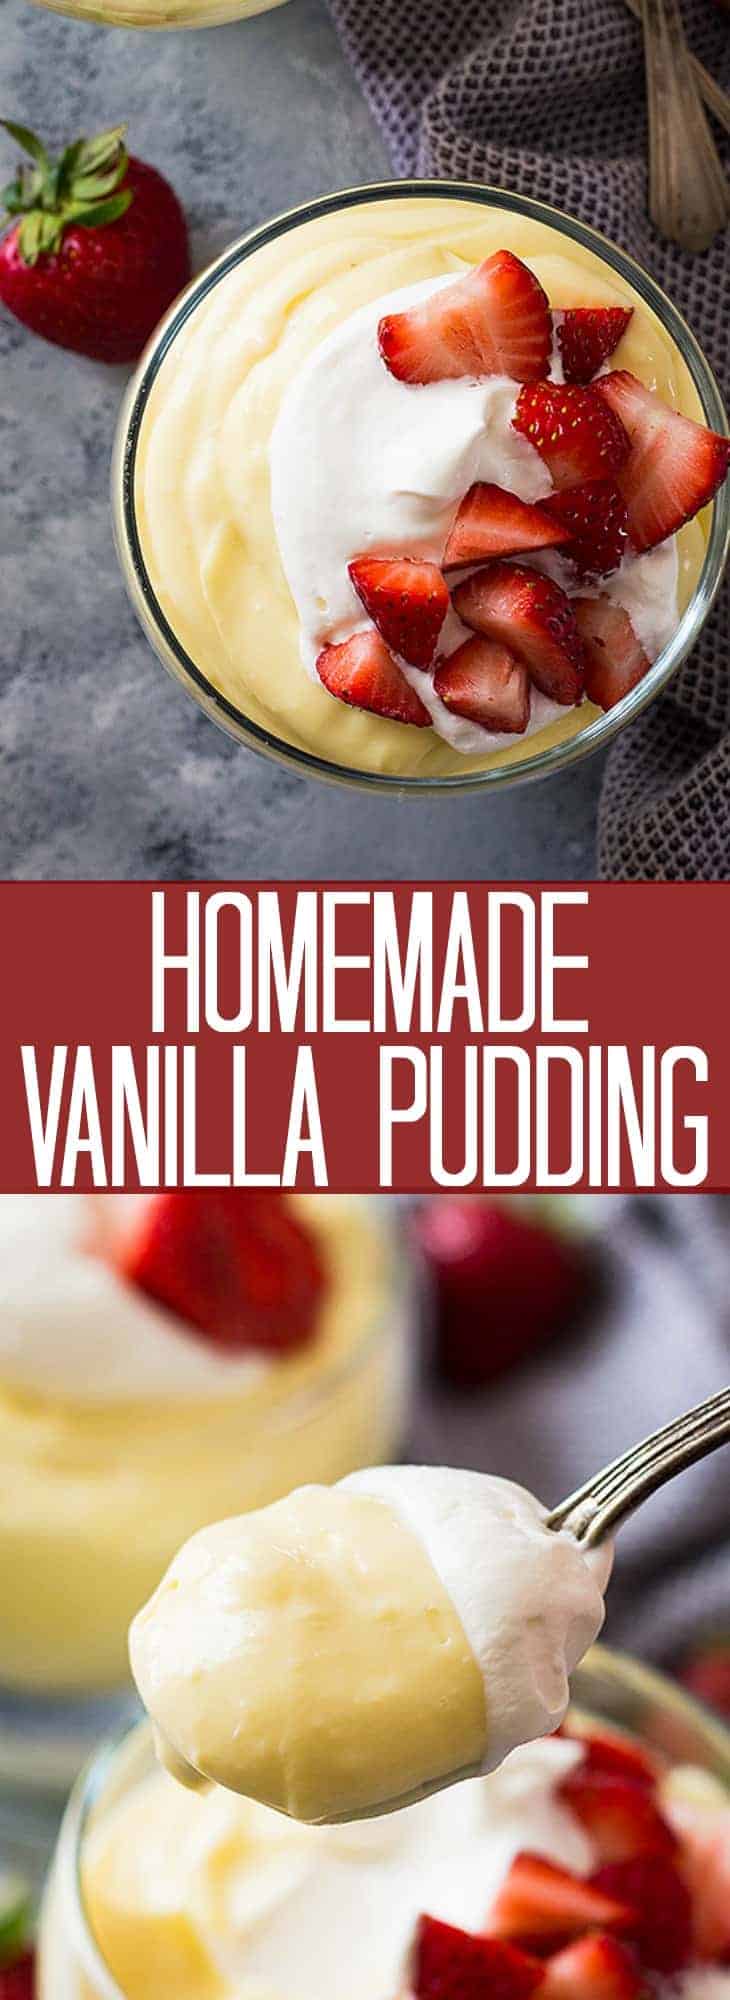 titled image (and shown): homemade vanilla pudding